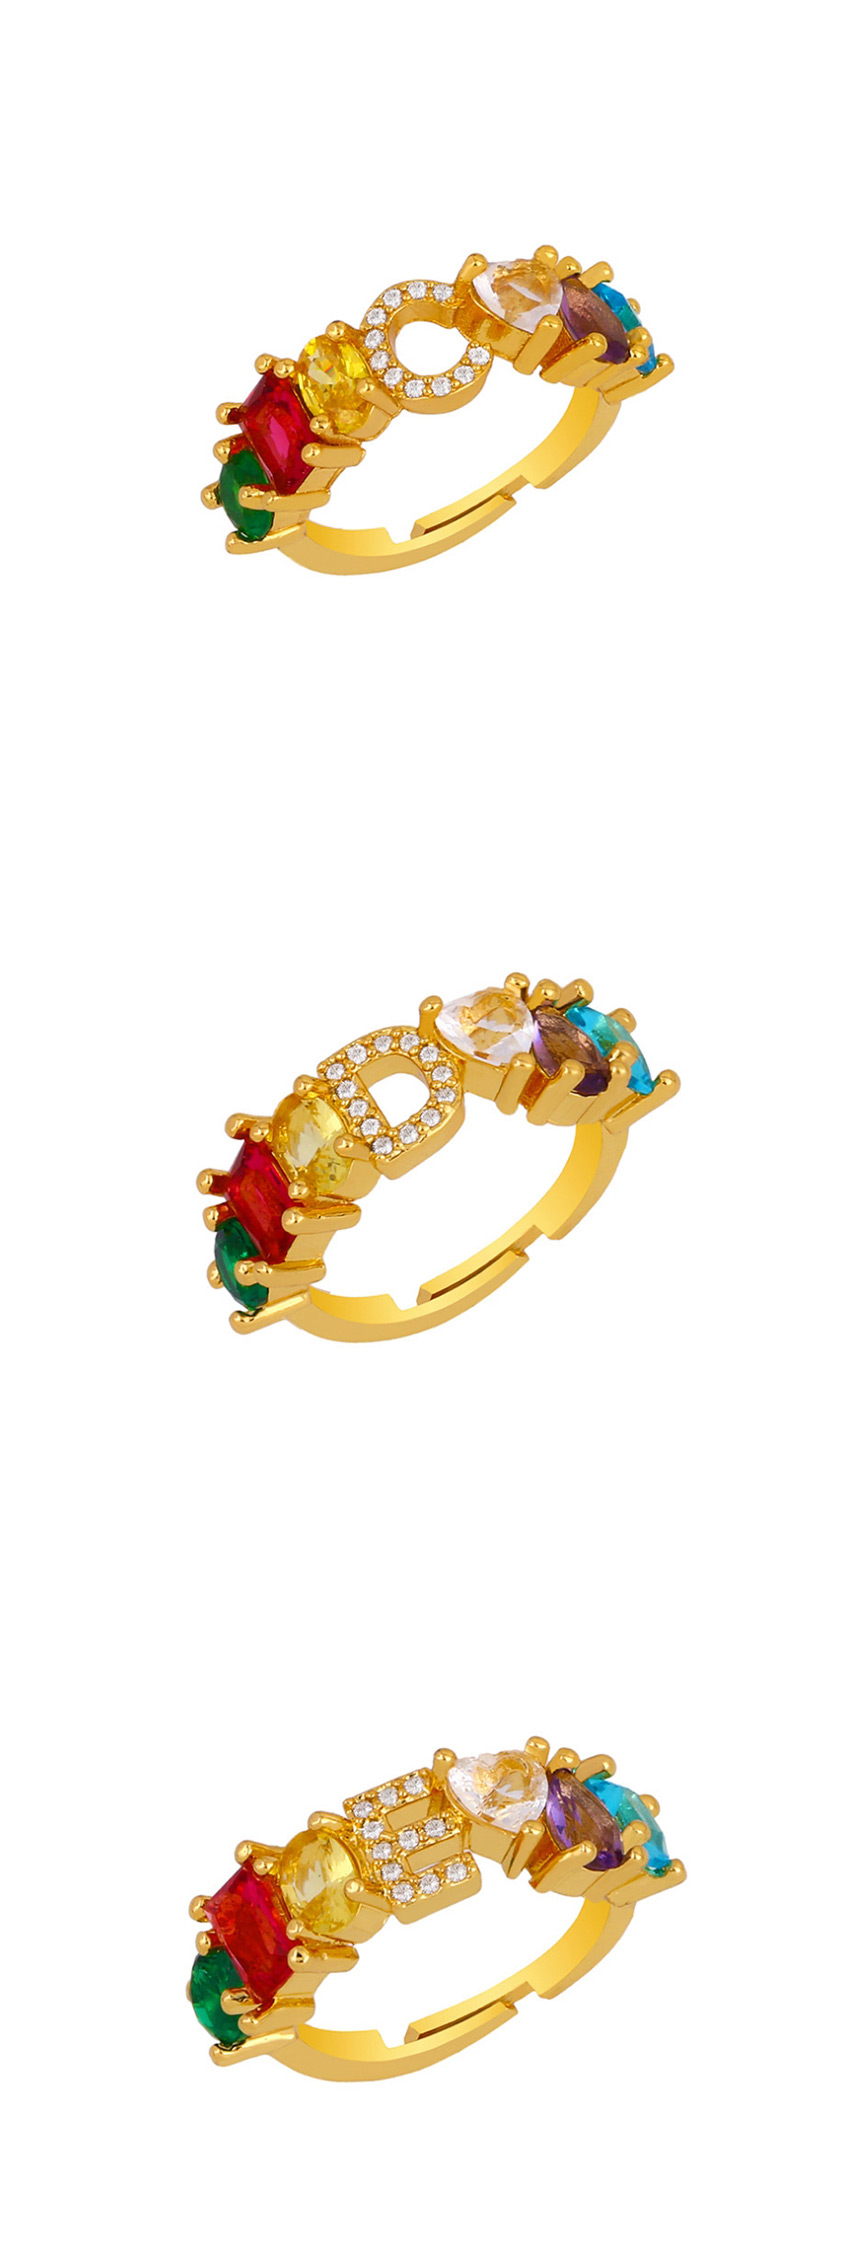 Fashion Q Gold Heart-shaped Adjustable Ring With Colorful Diamond Letters,Rings